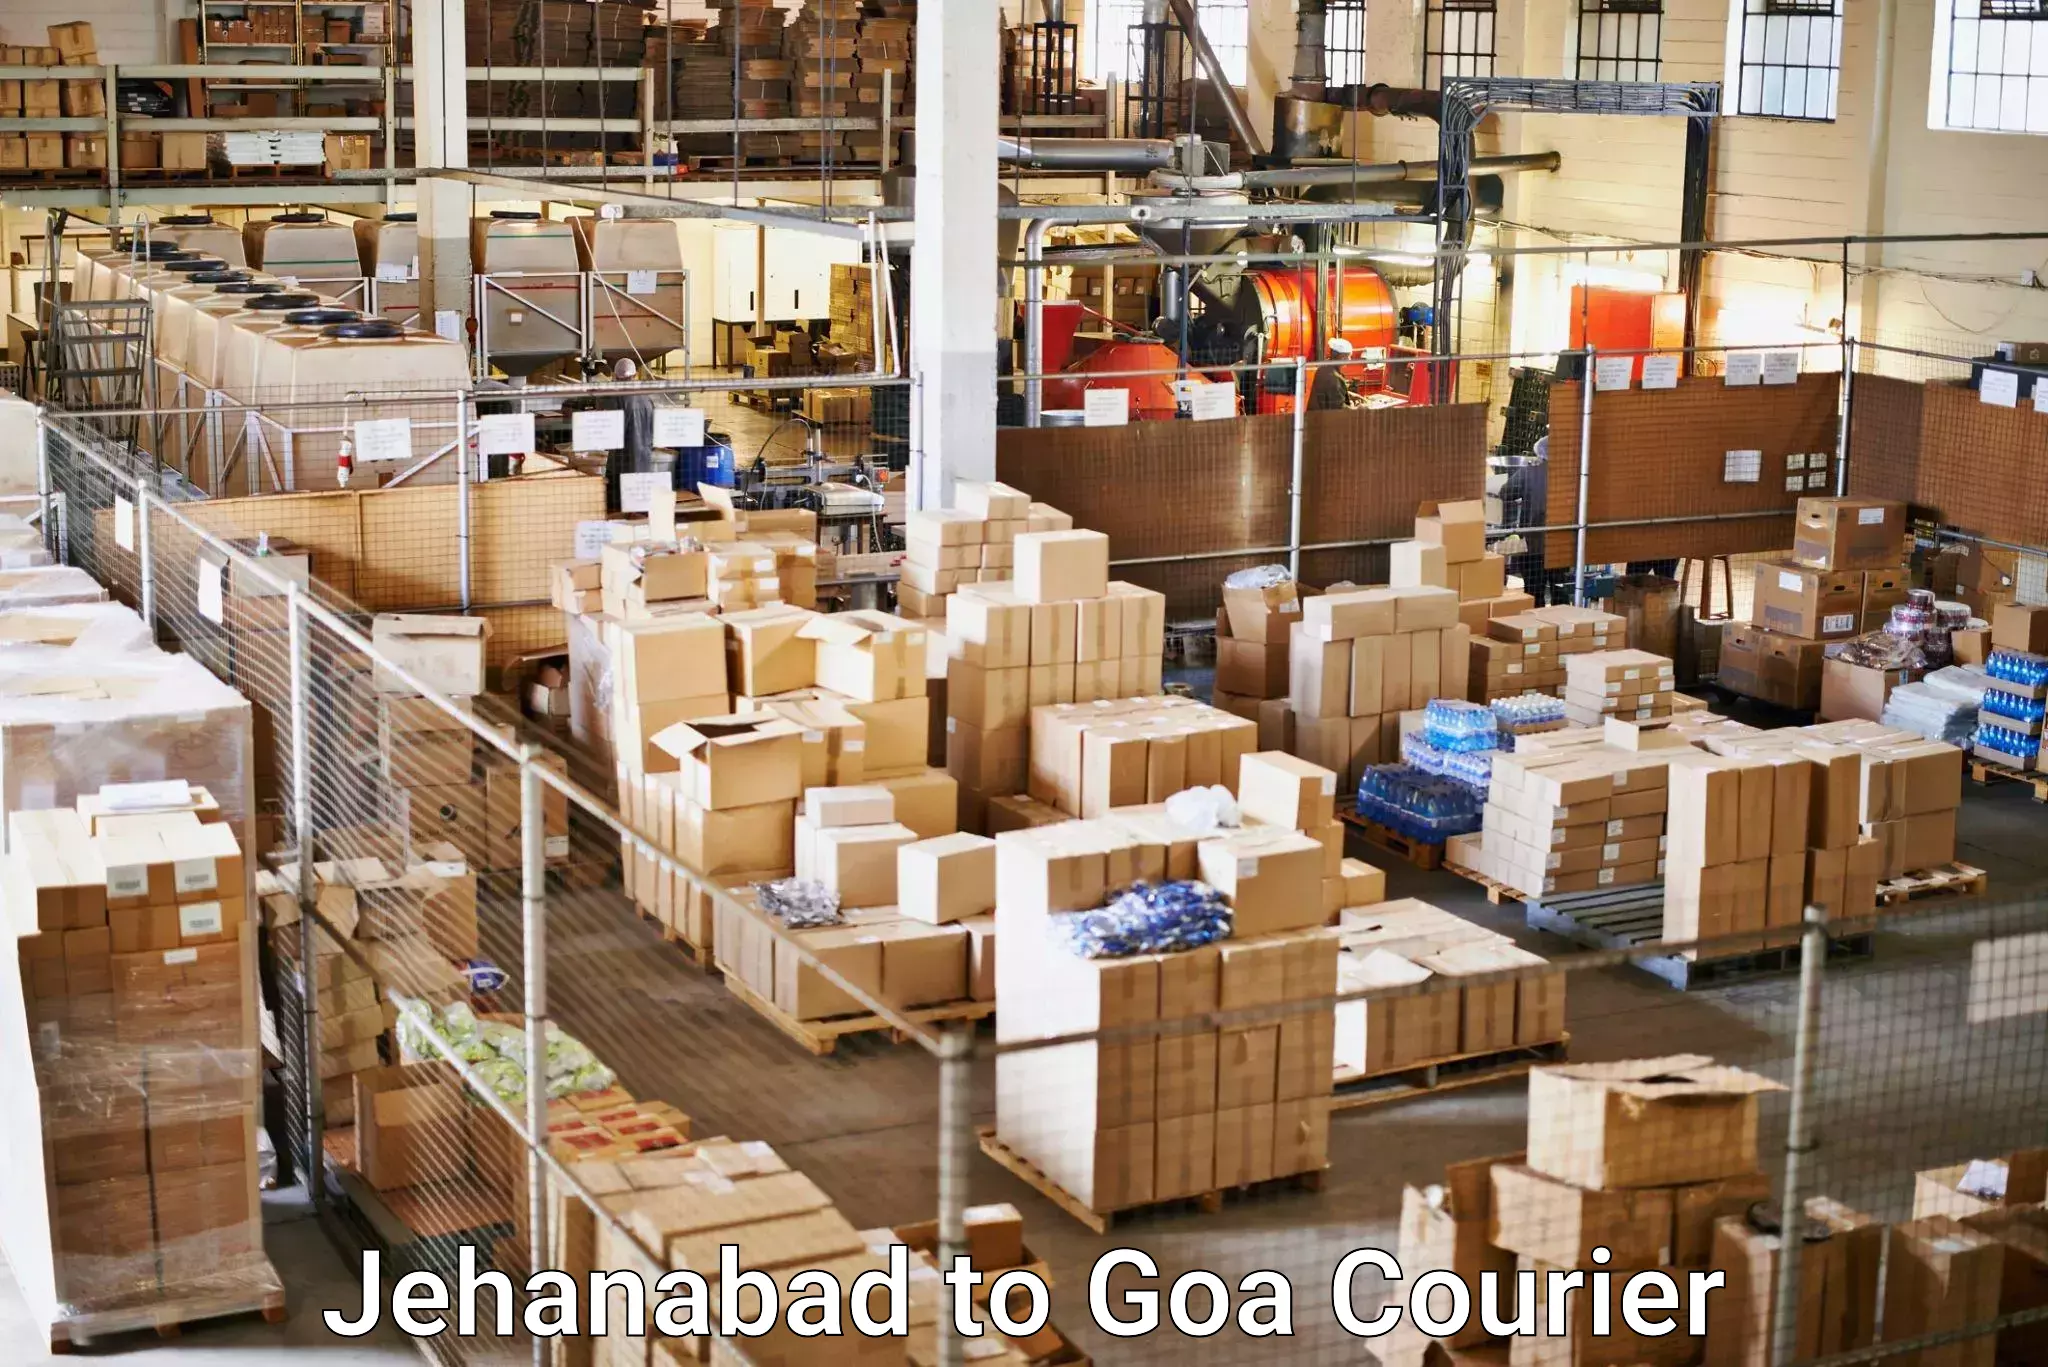 Courier service comparison Jehanabad to Panjim